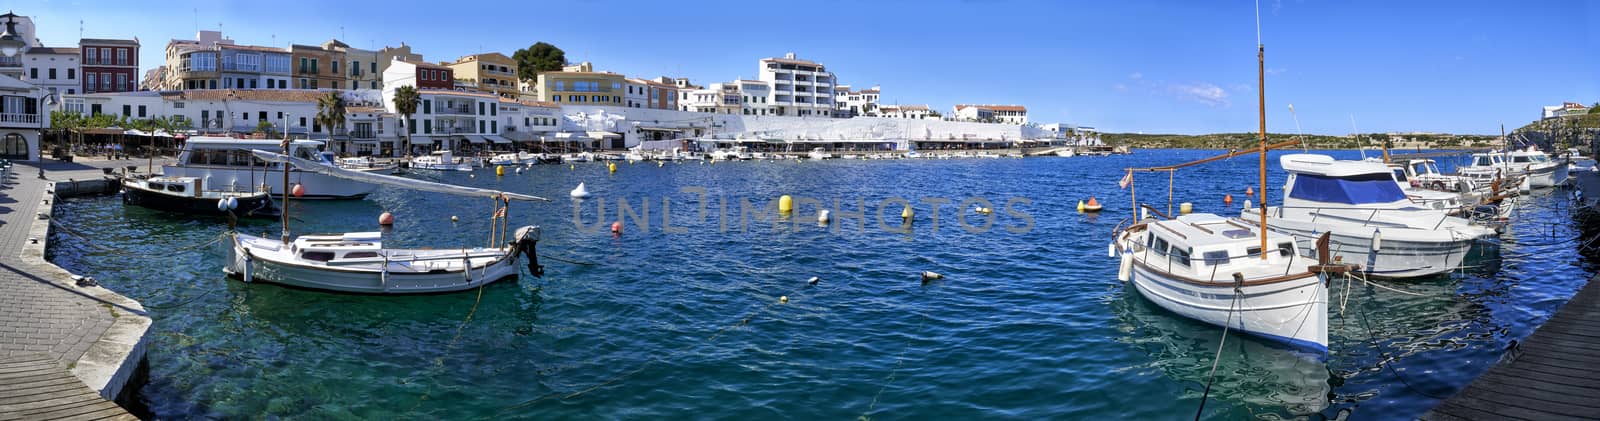 Panoramic view of Boats moored in Es Castell harbour, Menorca